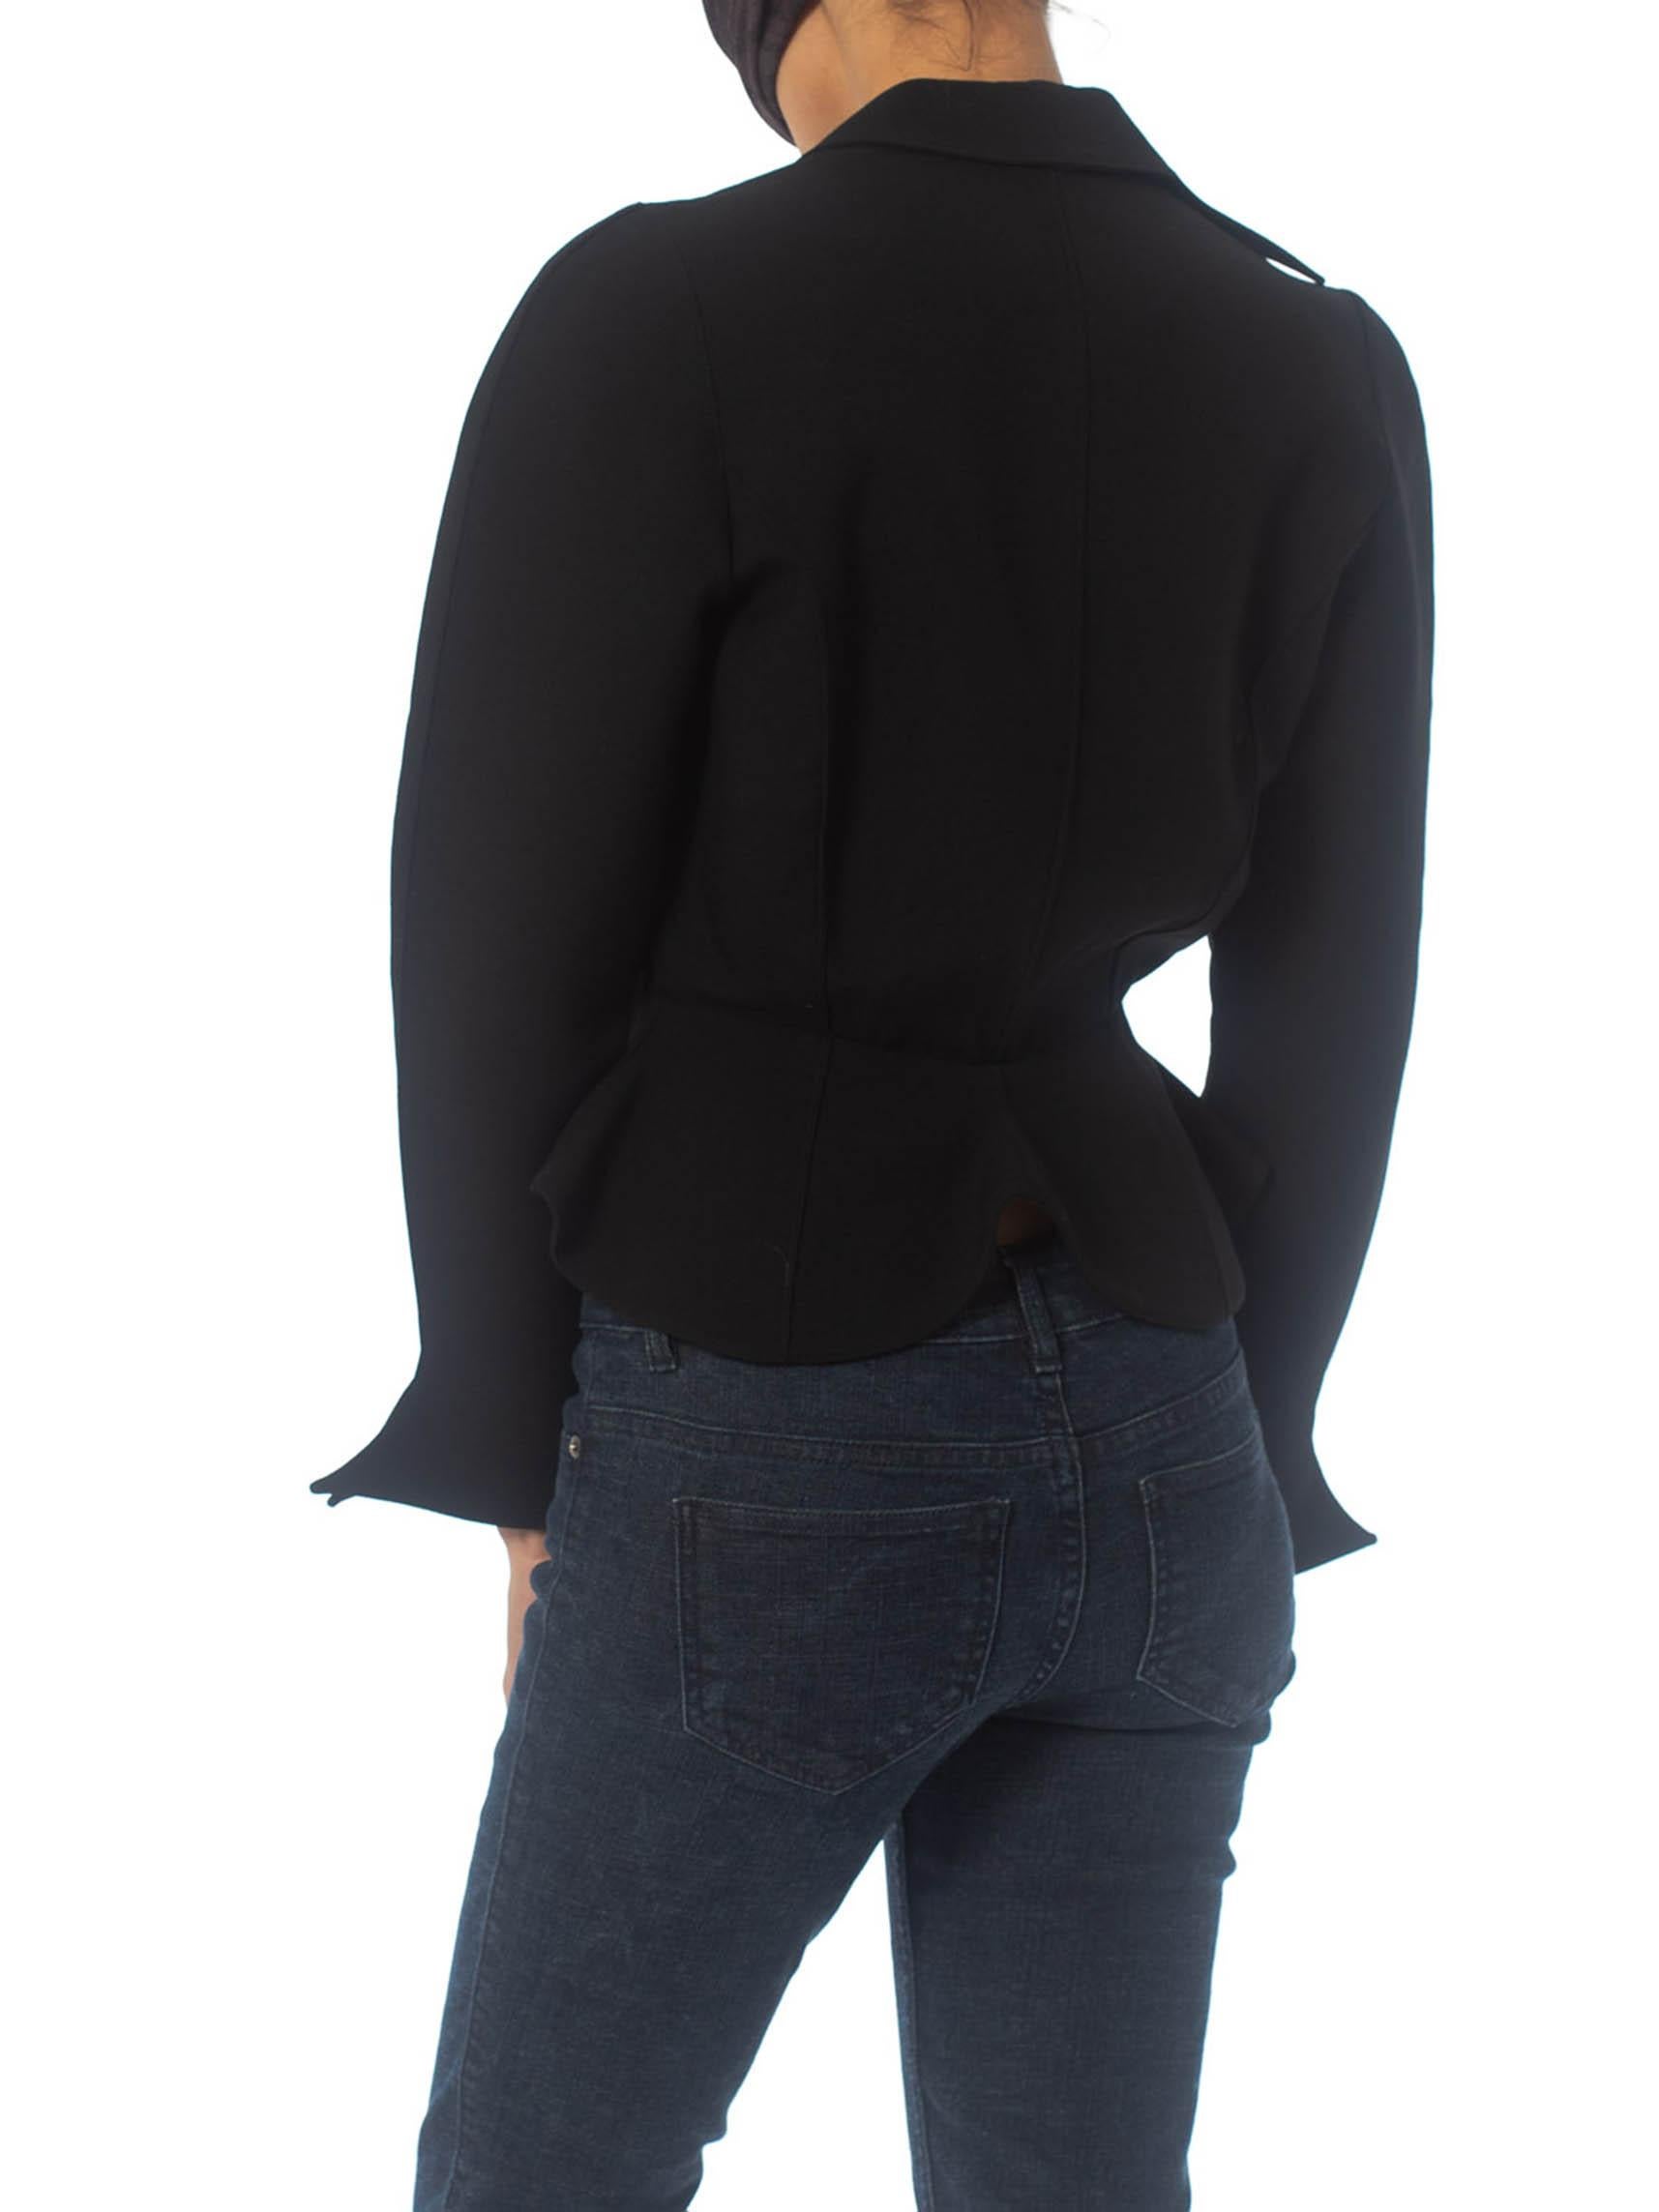 1990S THIERRY MUGLER Black Wool Witchy Wasp Waist Jacket With Asymmetrical Lapels & Detailing